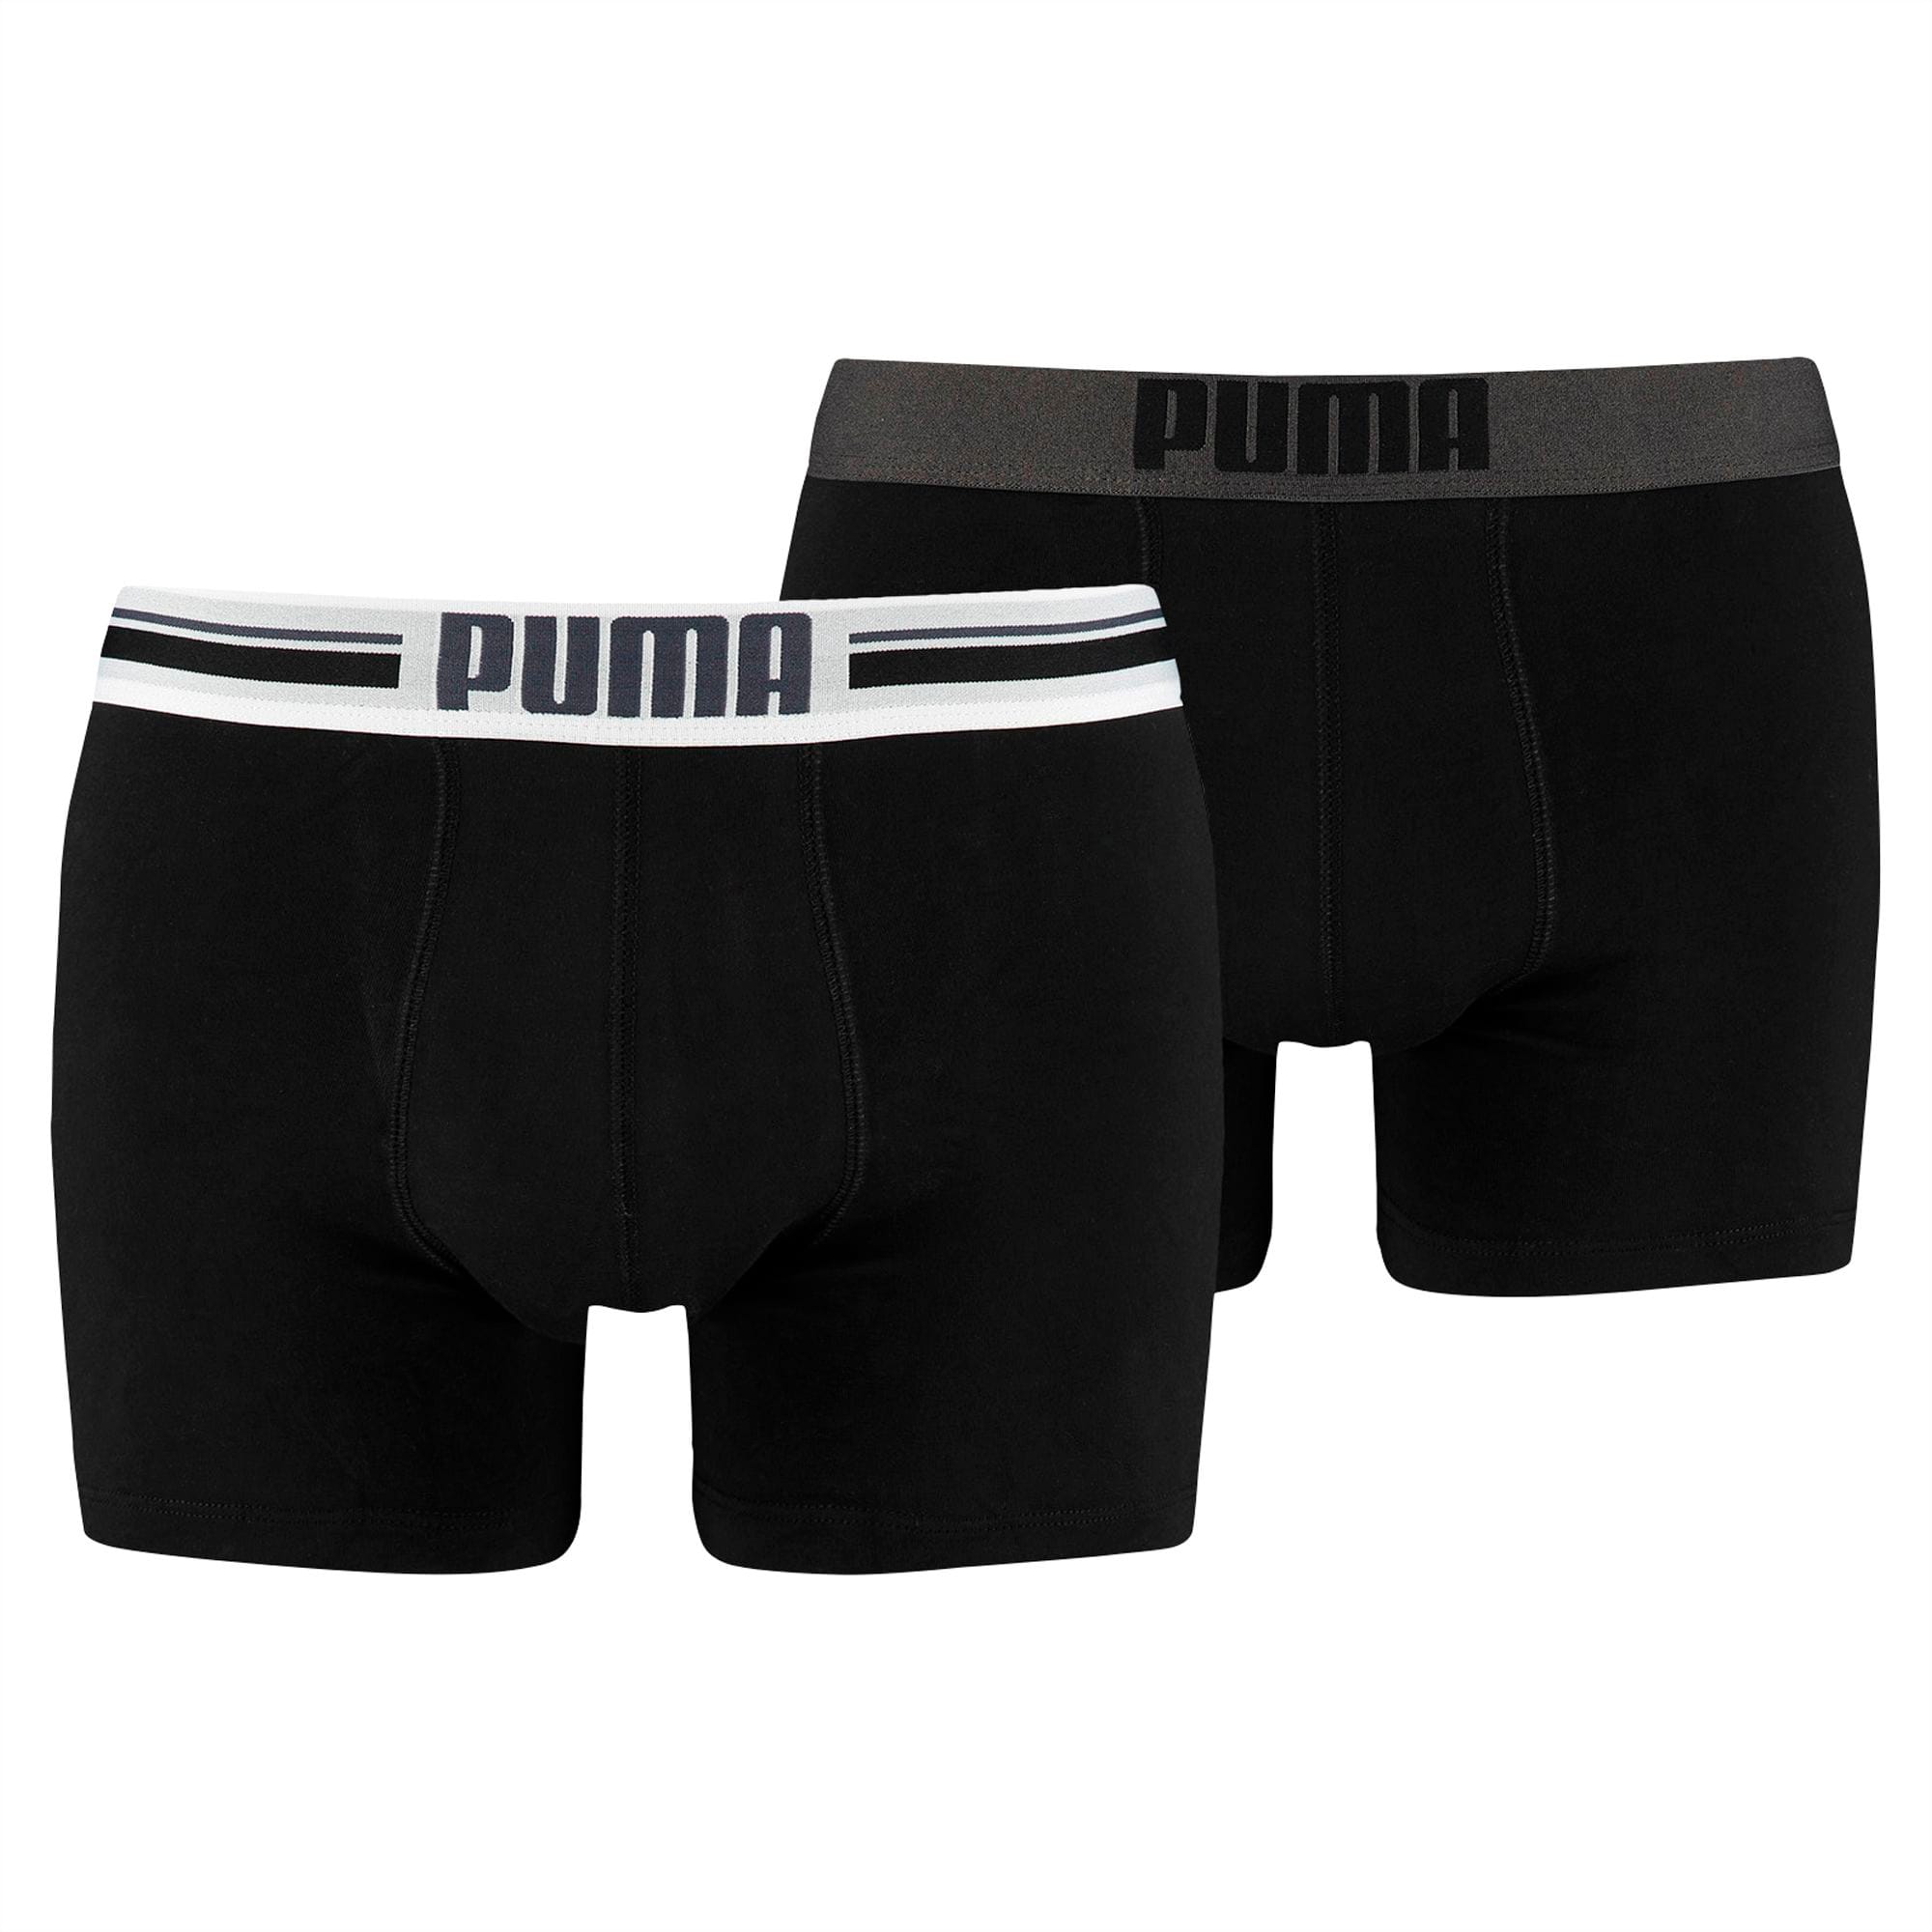 PUMA Placed Logo Men's Boxers (2 Pack 